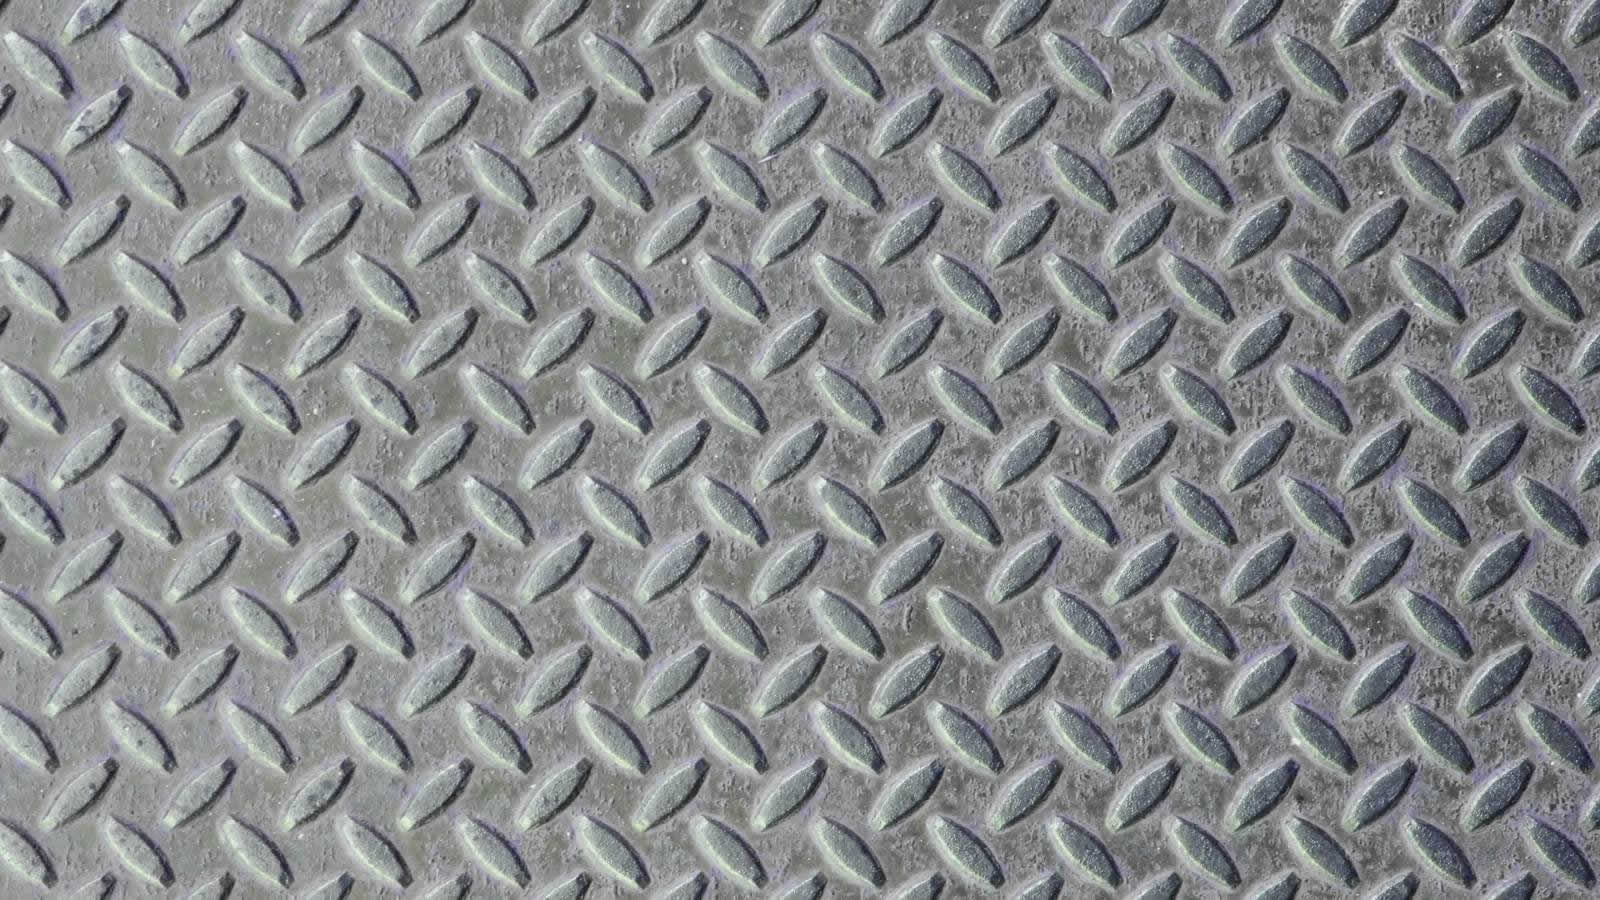 Harley Davidson Motorcycles Diamond Plate Walpaper Picture